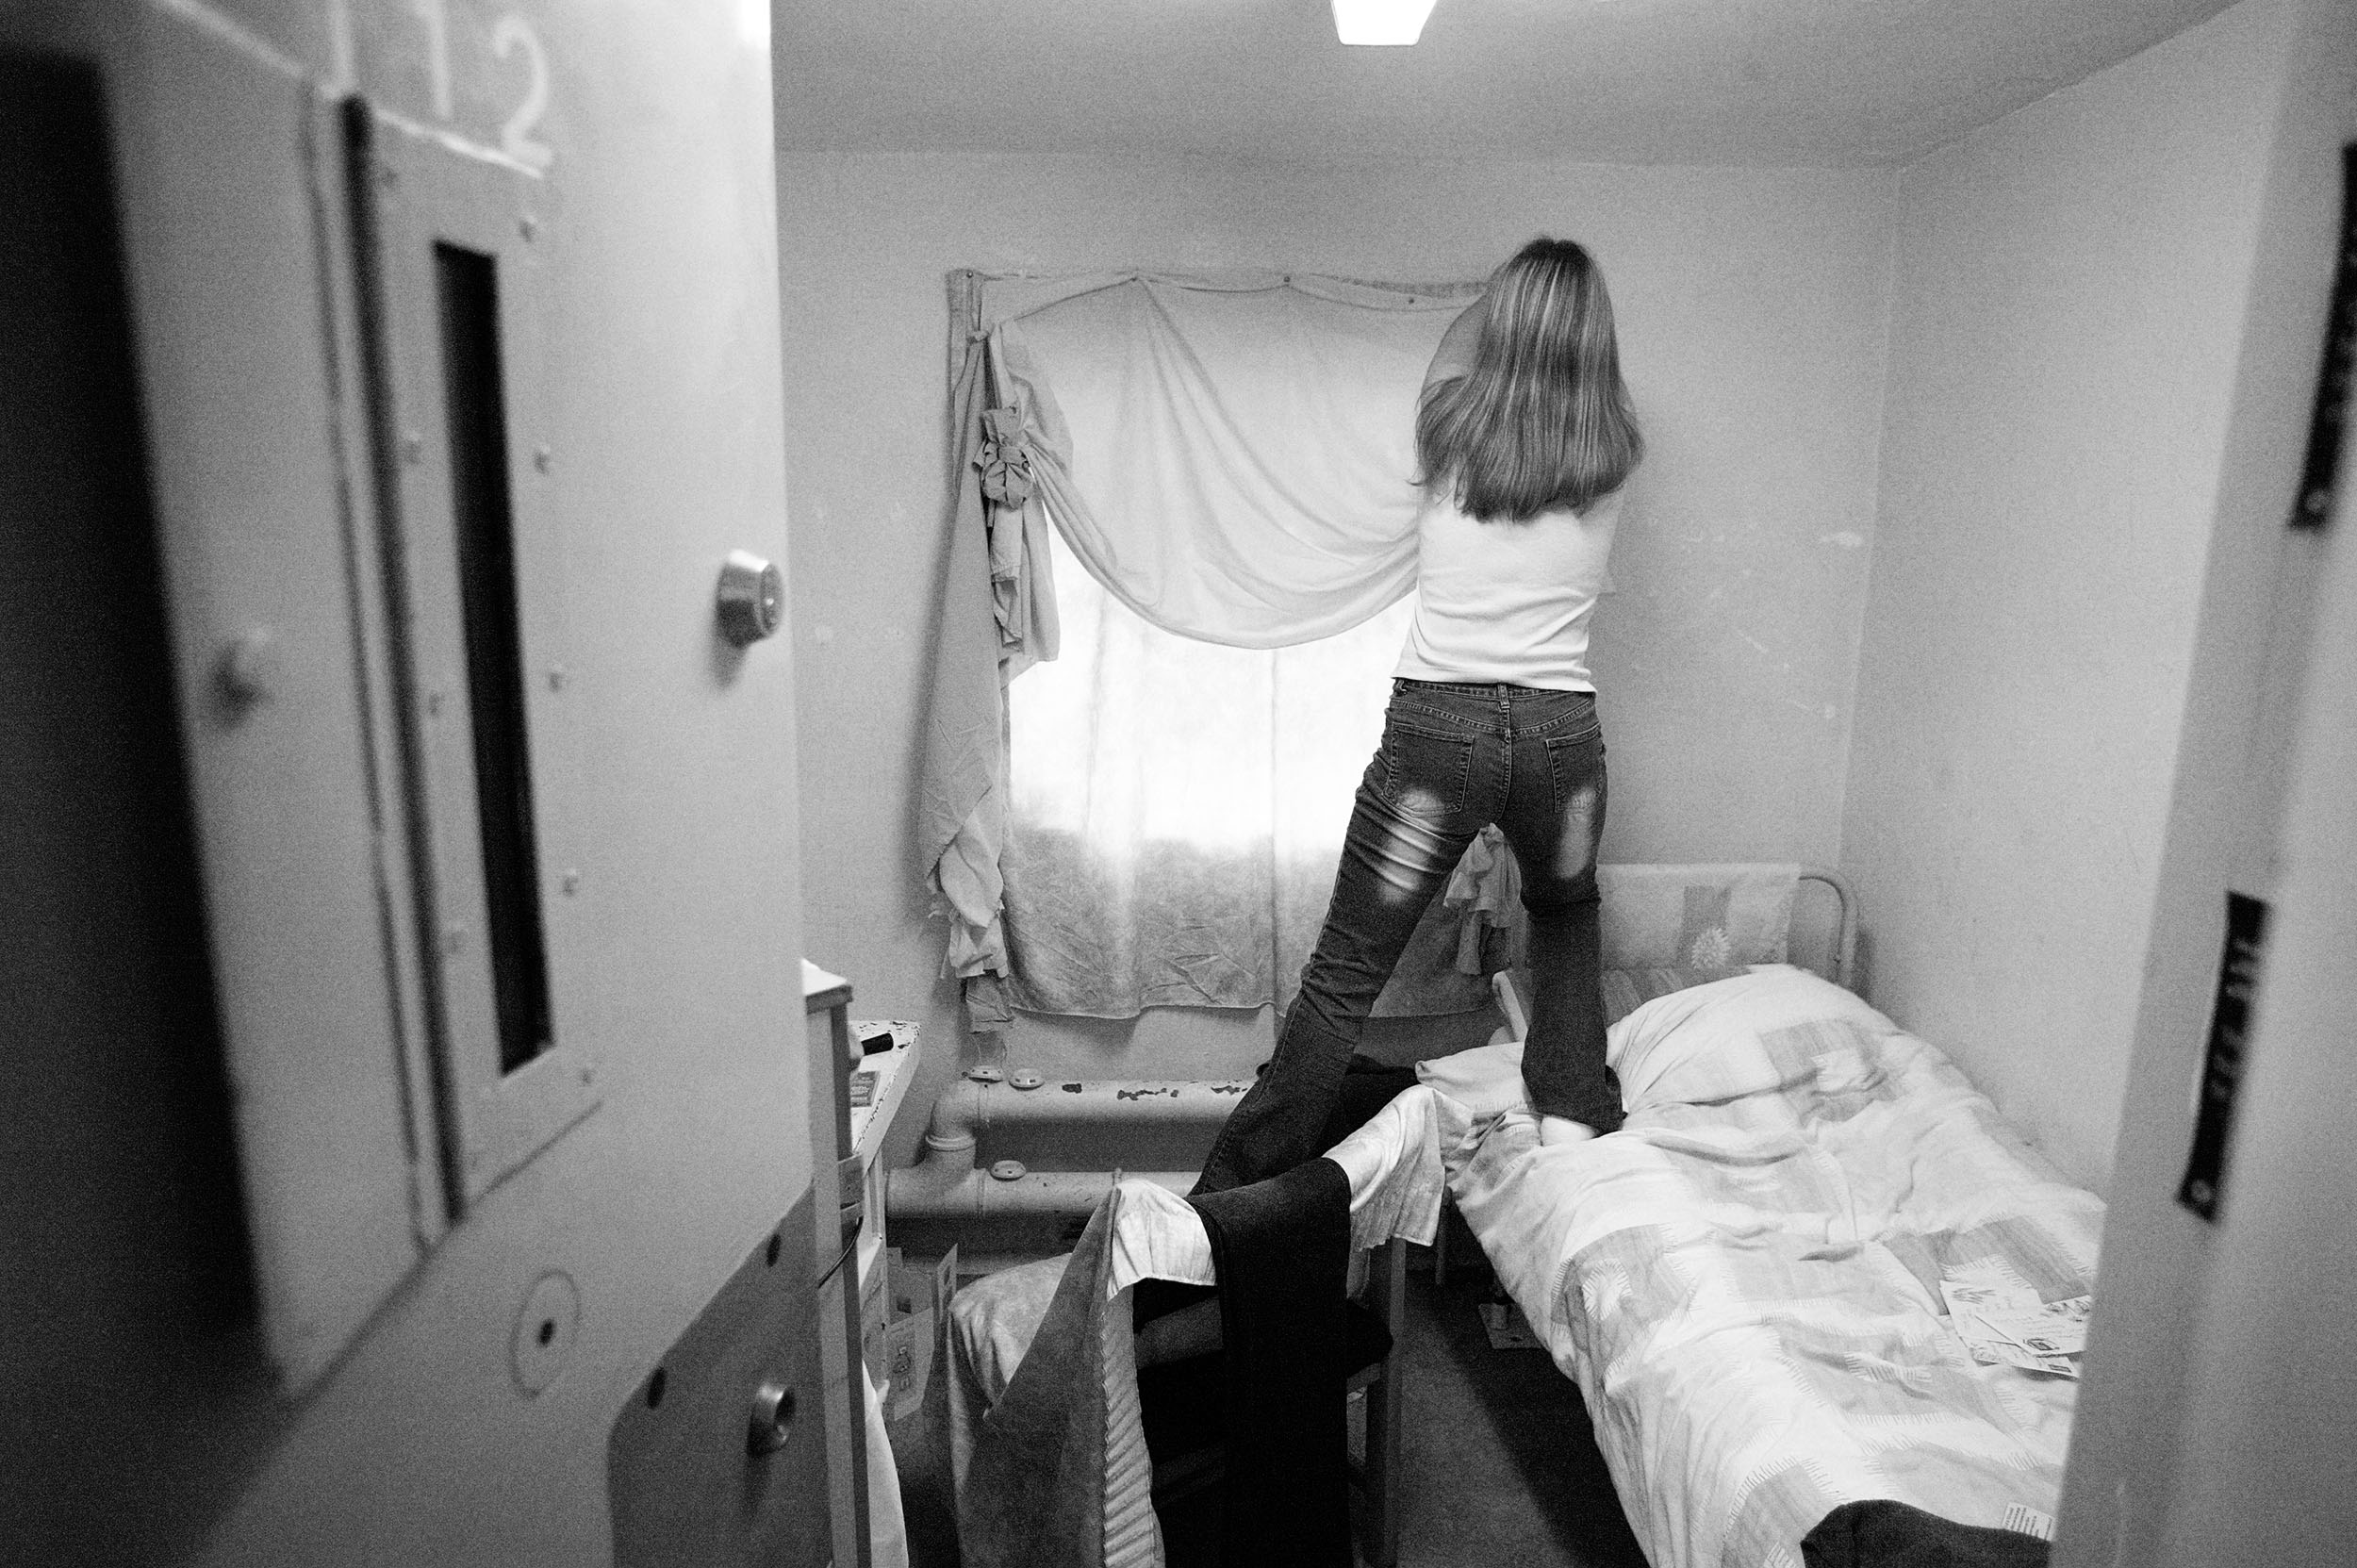  A prisoner makes her cell more homely at Brockhill Women's prison in Redditch, Worcestershire 